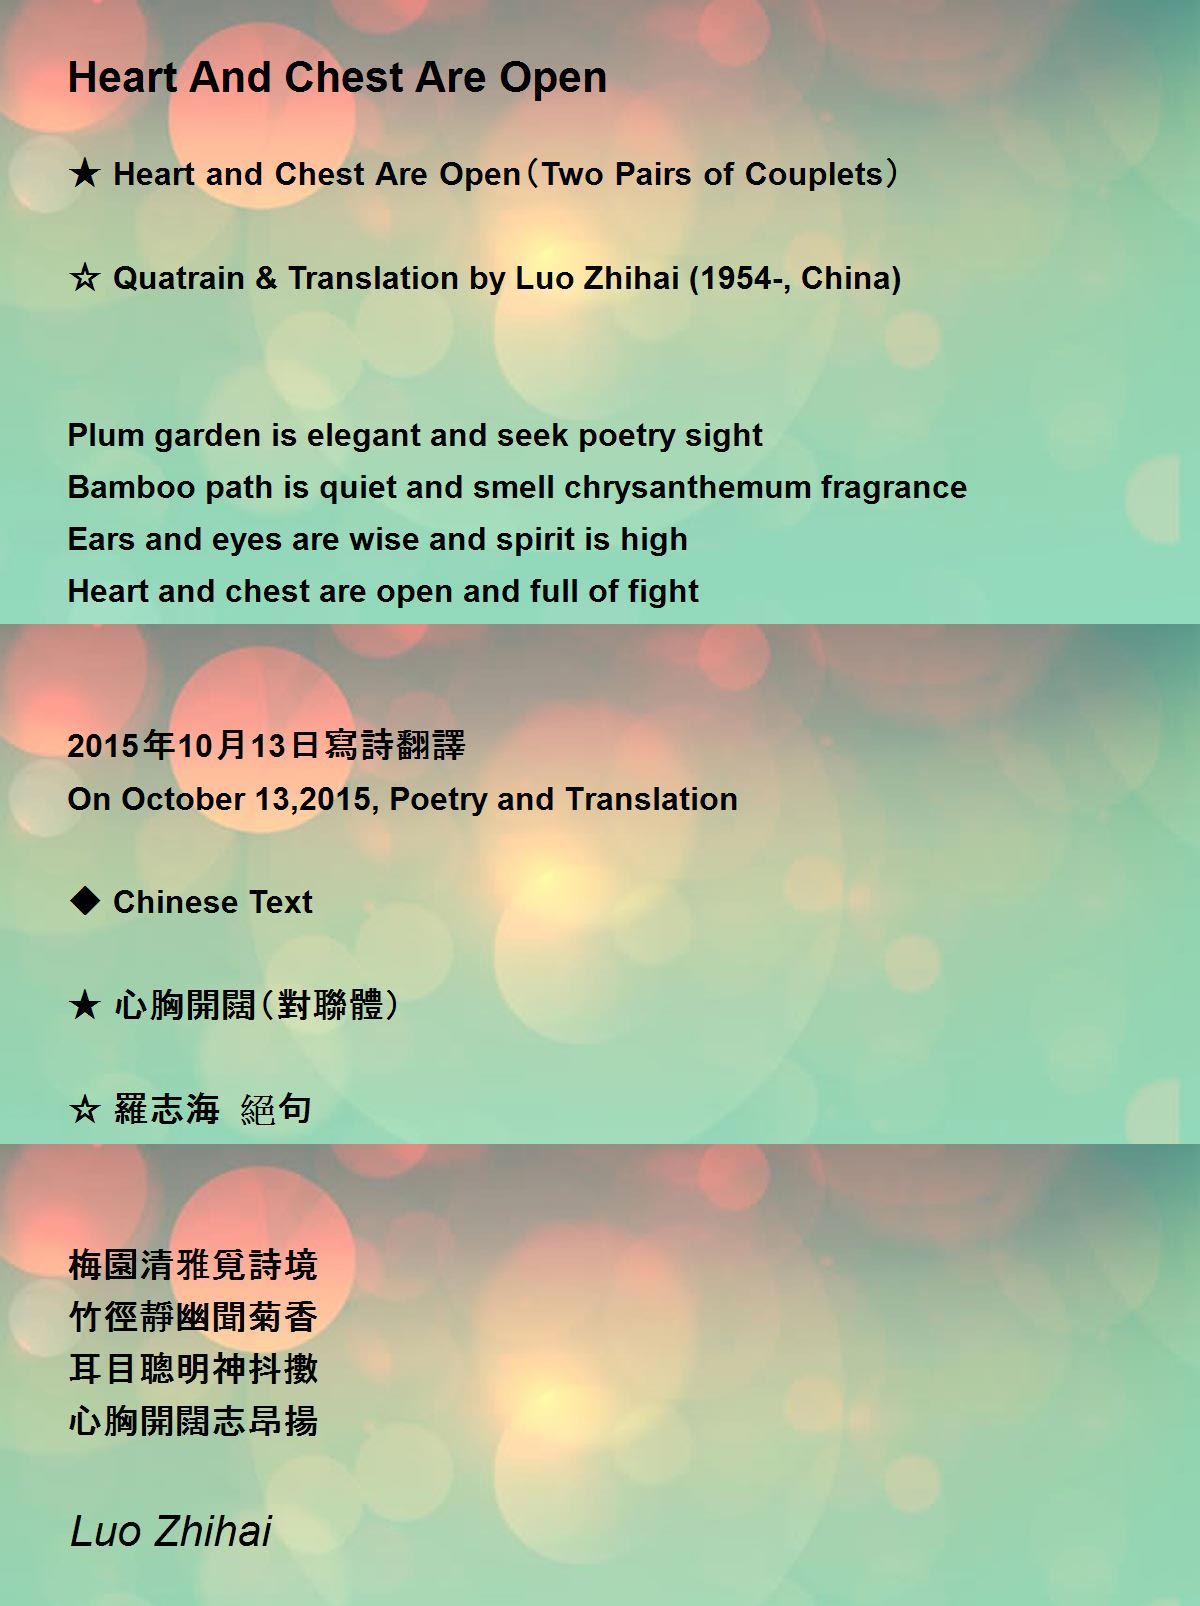 Heart And Chest Are Open - Heart And Chest Are Open Poem by Luo Zhihai